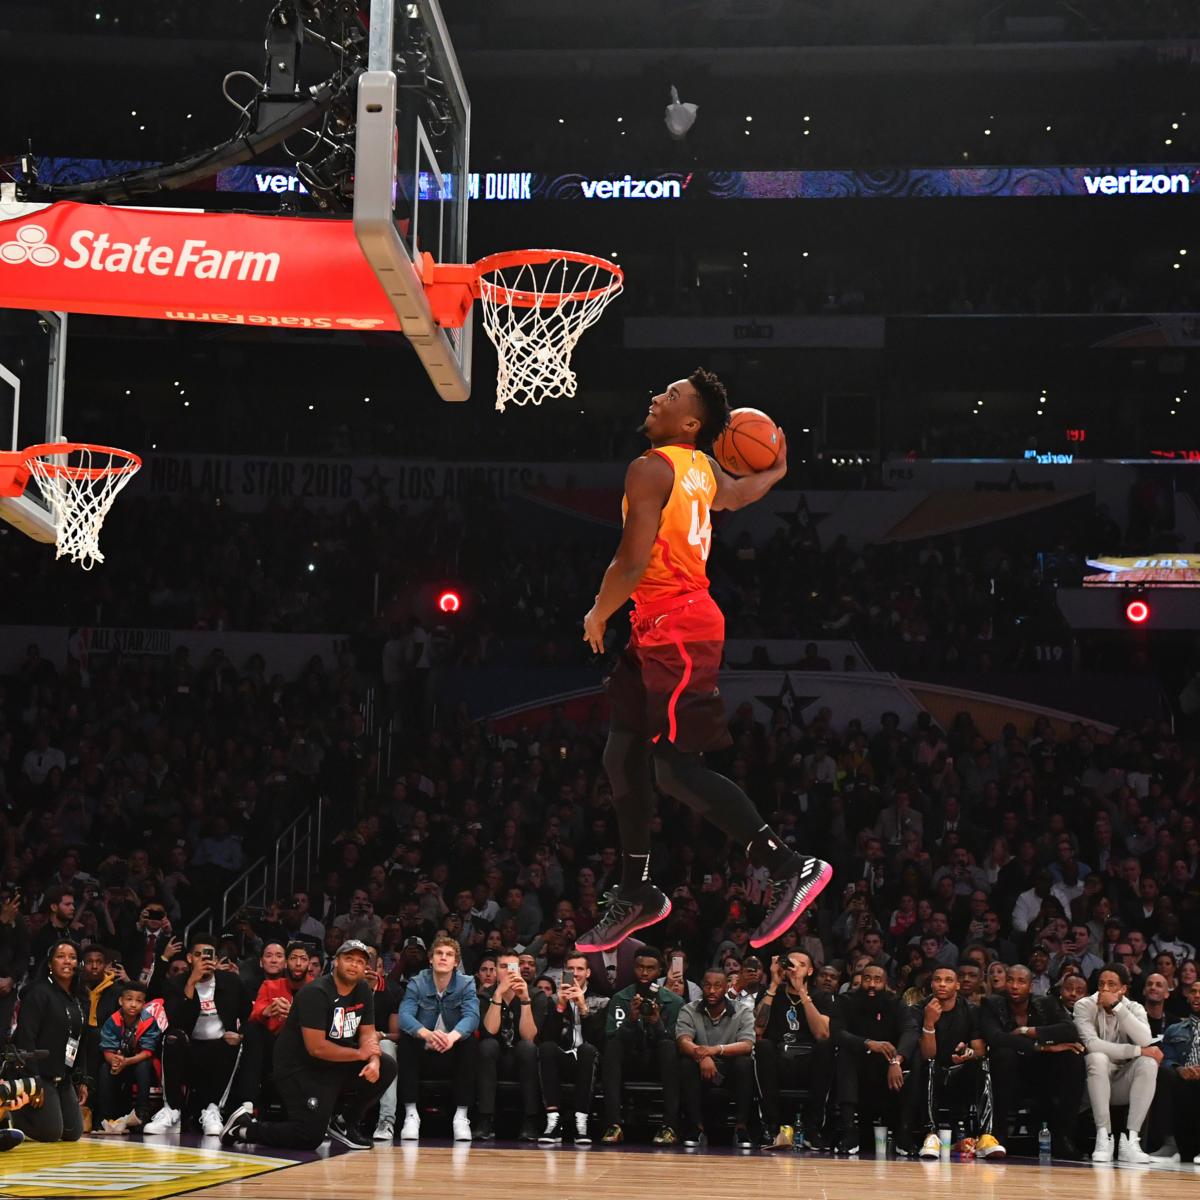 Louisville basketball: Donovan Mitchell to compete in NBA Slam Dunk Contest